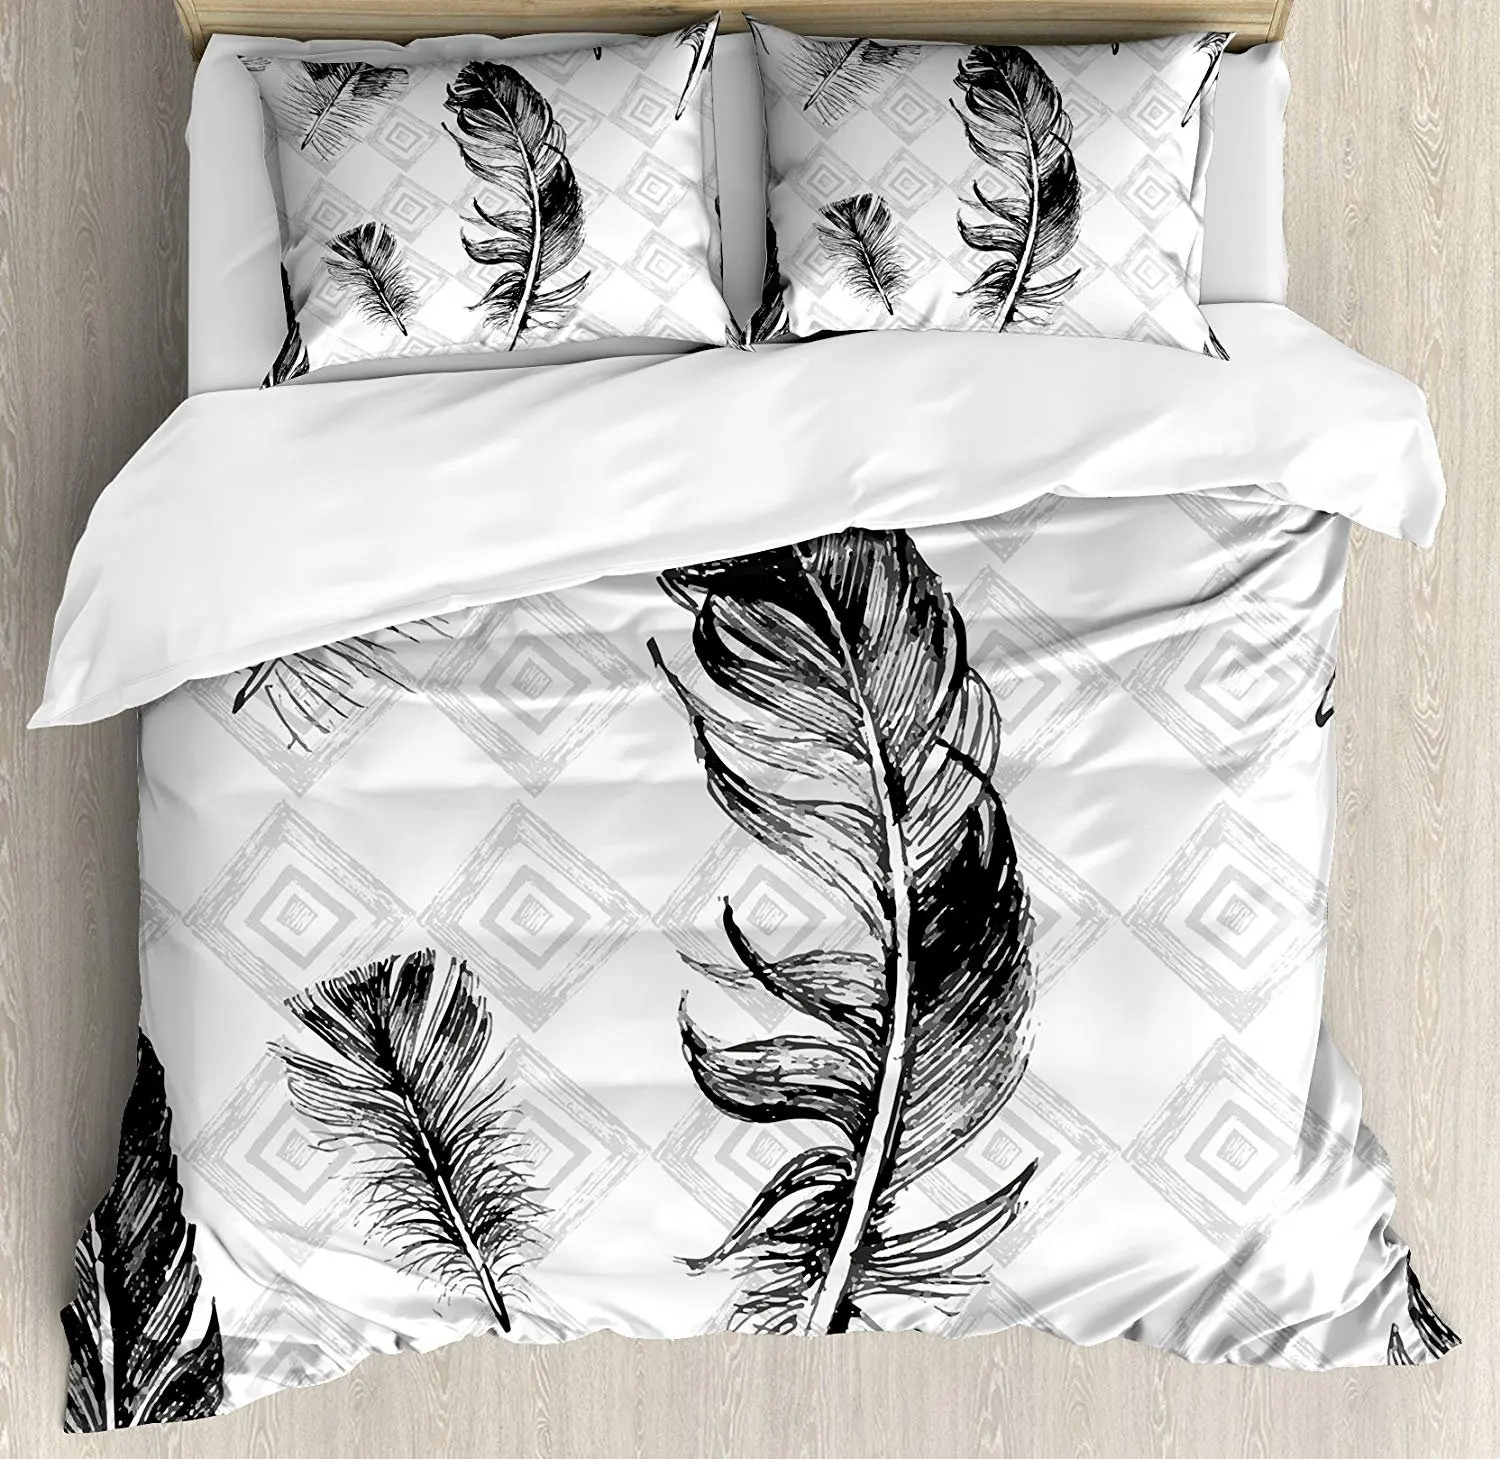 Feather Bedding Set Faded Geometric Nested Squares Mosaic Fluffy Wings Fly Duvet Cover Pillowcase Bedclothes Double Bed Set